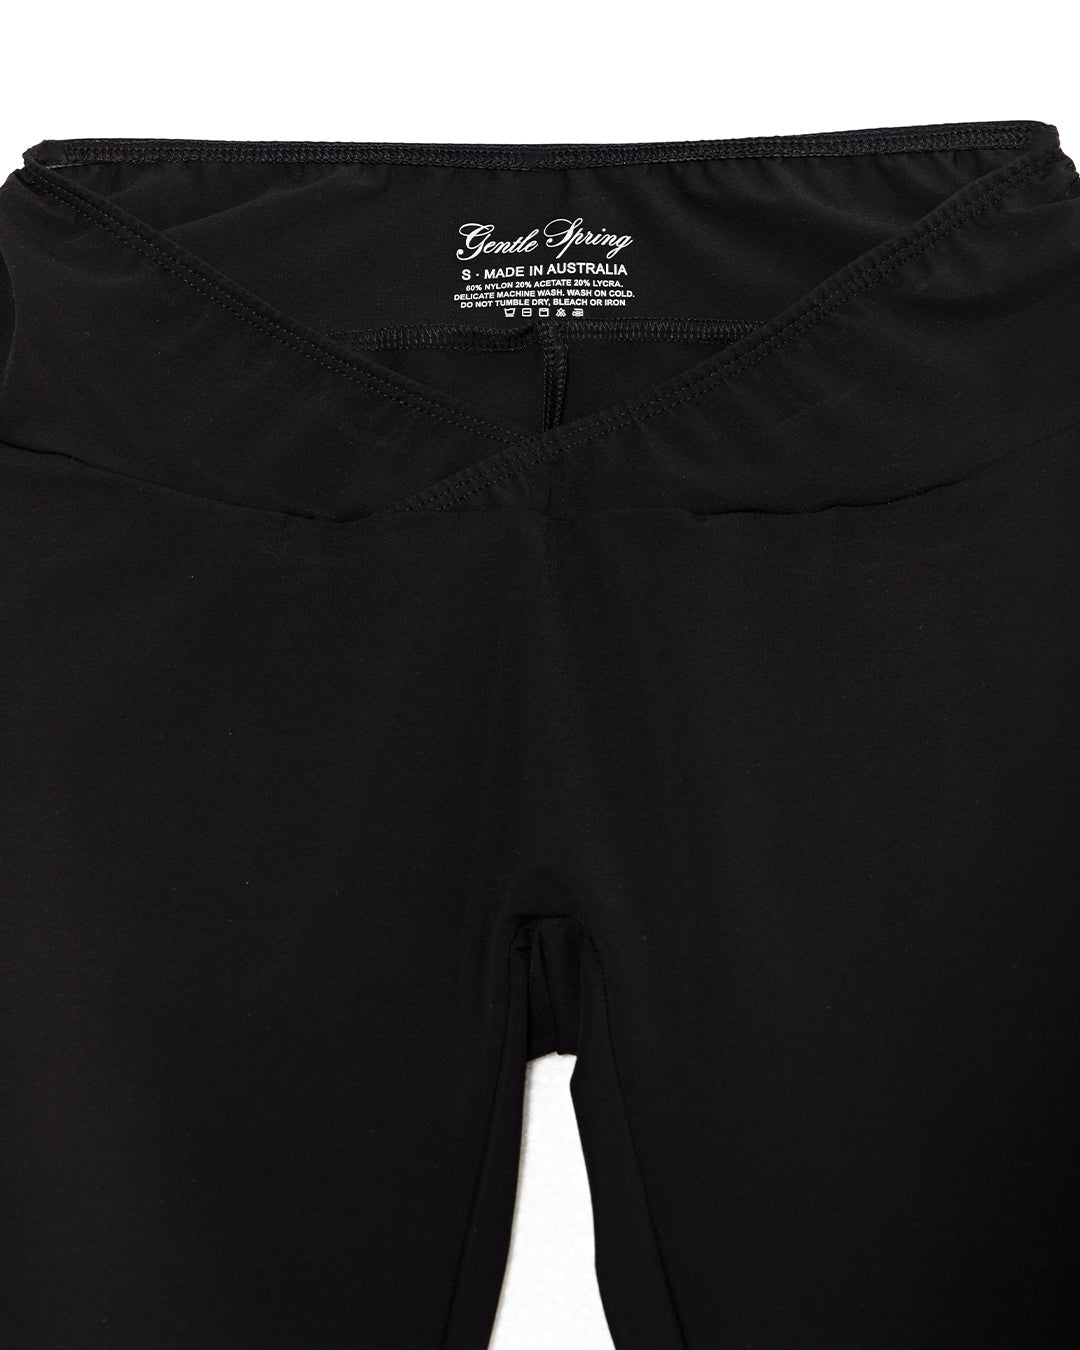 ALL IS A GENTLE SPRING - The Stretch Trouser Pitch Black